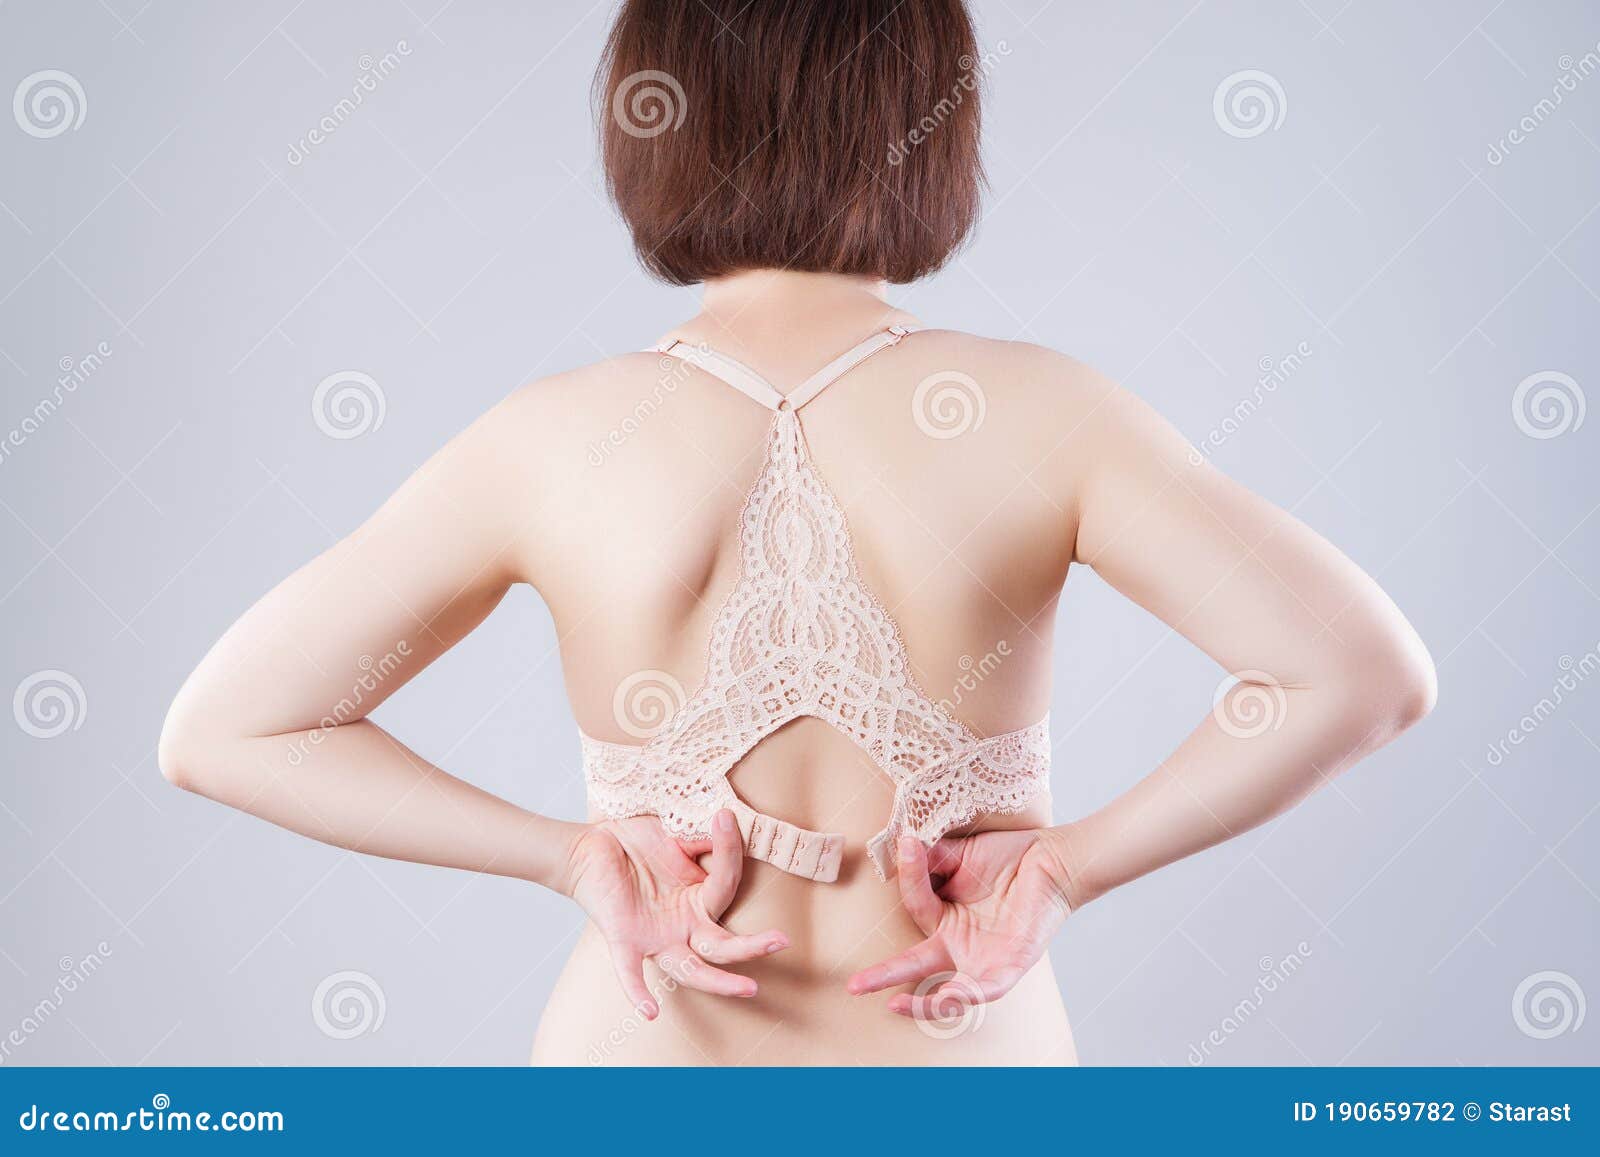 Woman Undressing and Unhooking Her Bra Stock Photo - Image of passion,  back: 190659782